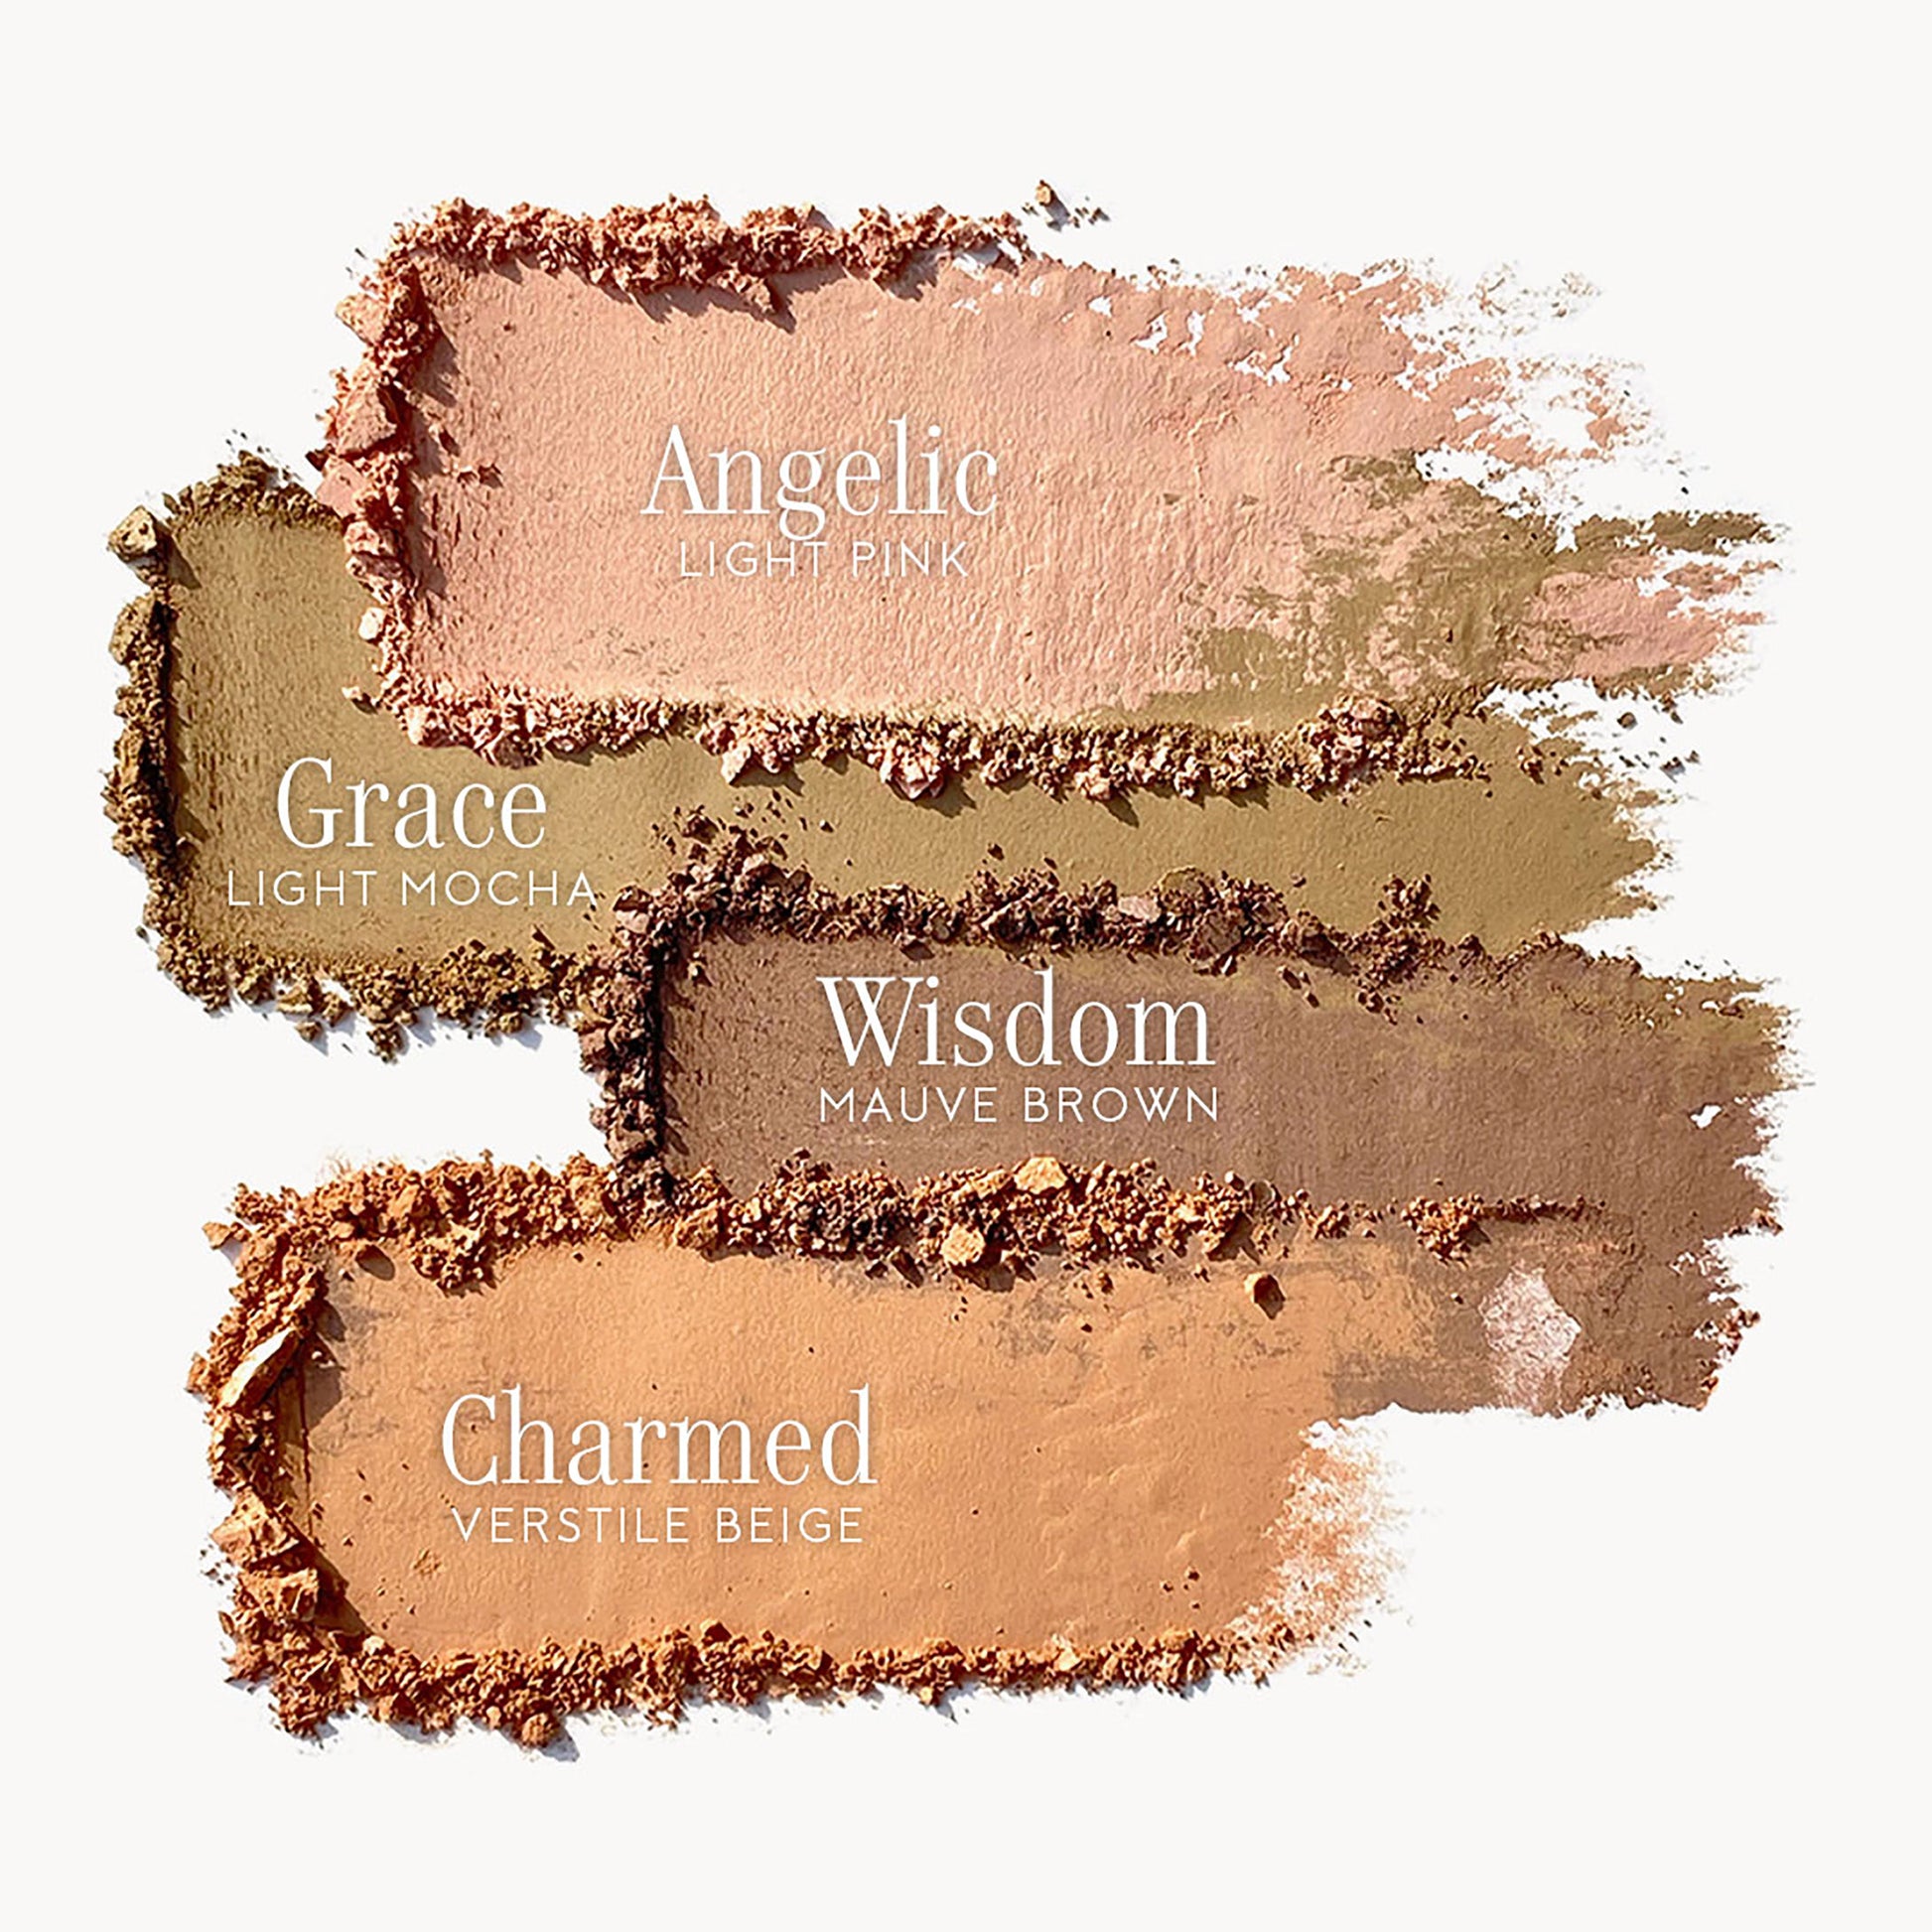 Four swipes of each eye shadow shade labelled with the name – Angelic is light pink, Grace is light mocha, Wisdom is mauve brown, Charmed is versatile beige 